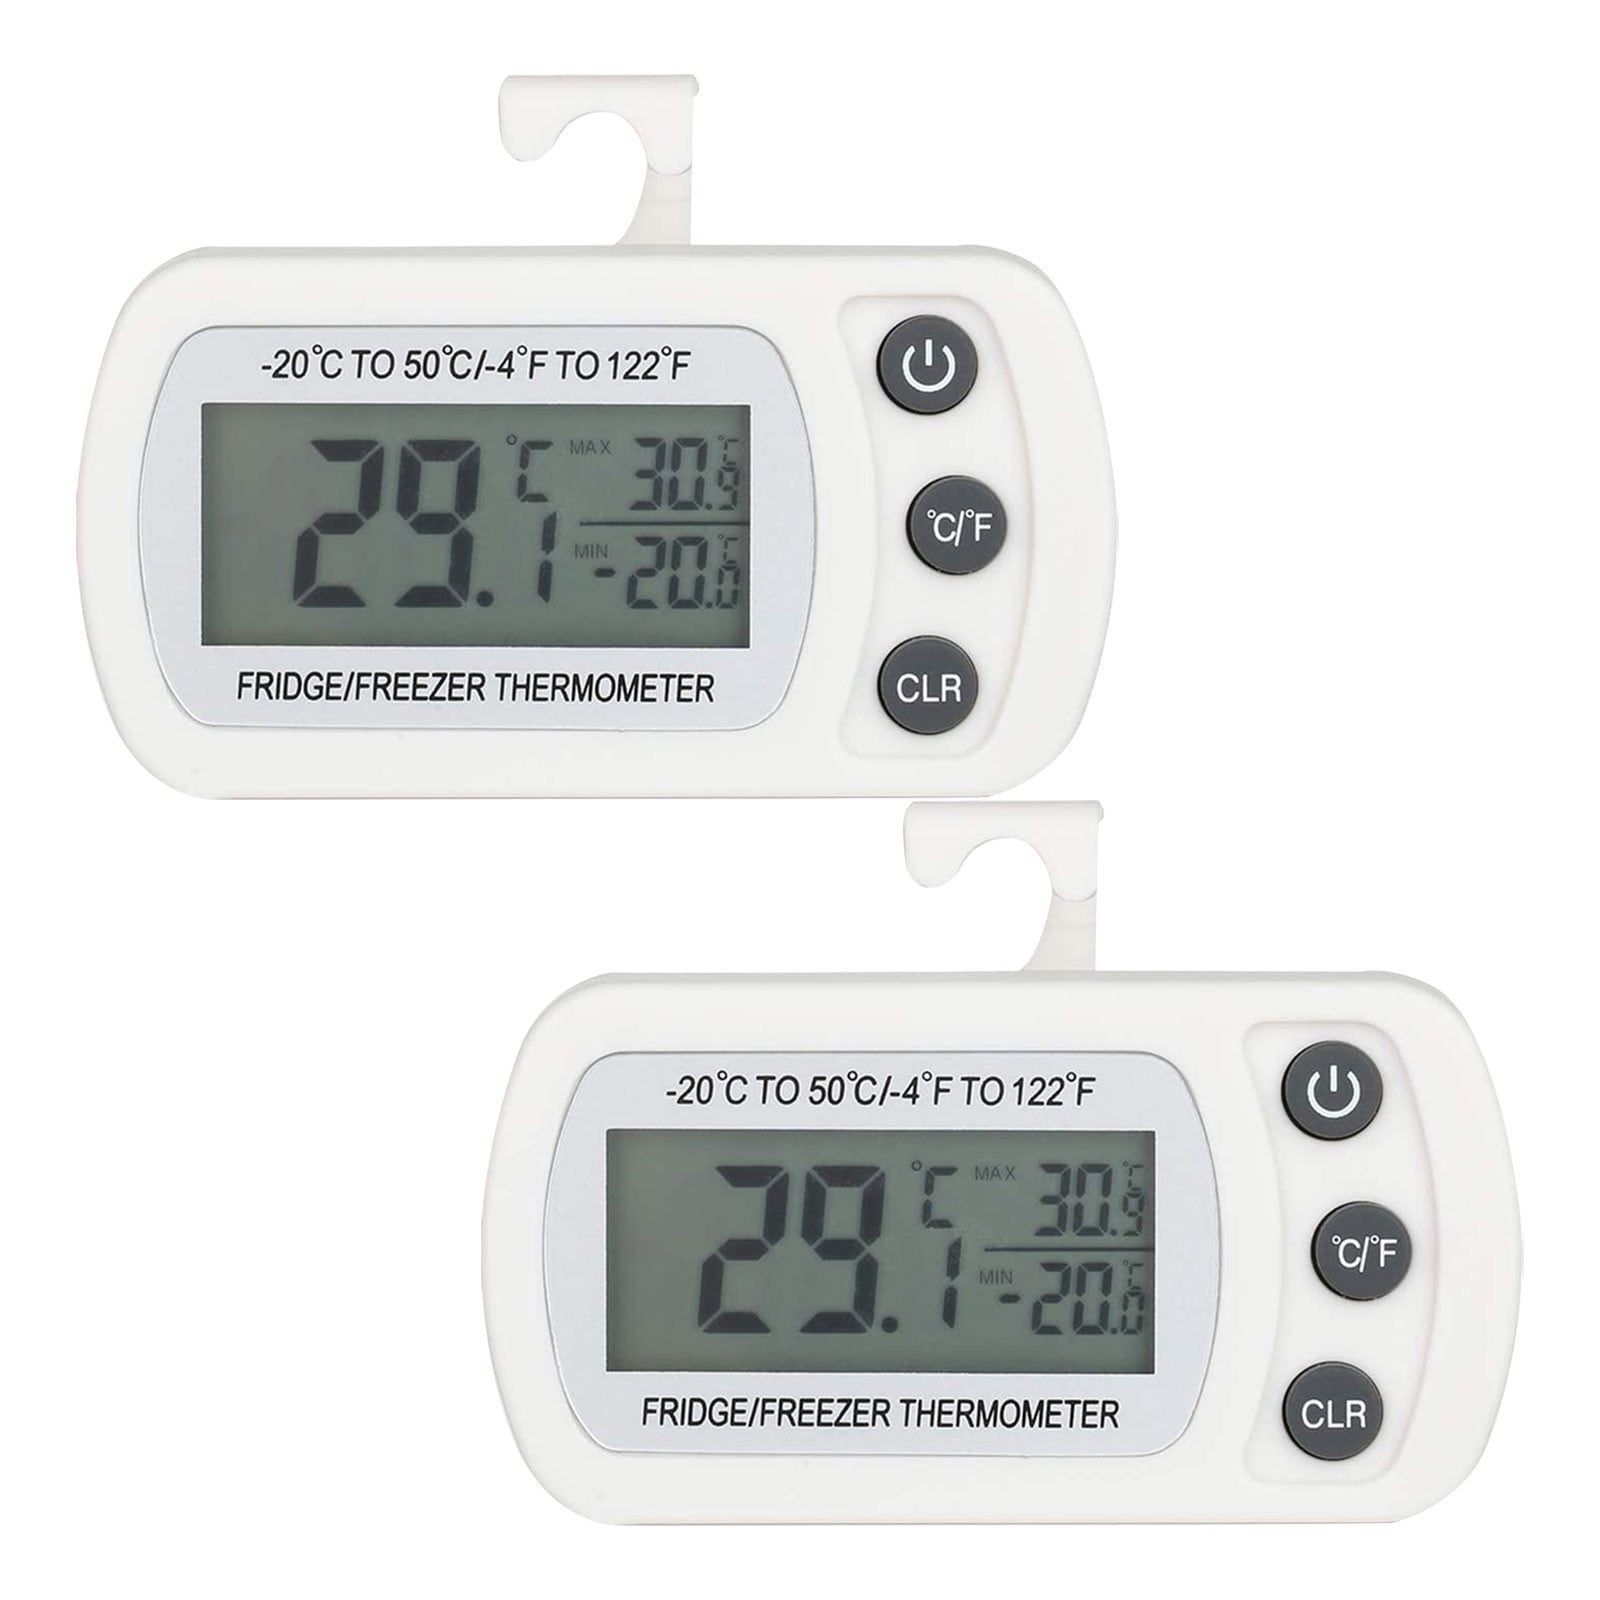 Fridge Greenhouse,Garden Office Cellar Vbestlife1 Mini Digital LCD Hygrometer,Indoor Thermometer,saving space,carrying around,precise,Humidity Monitor for Home Closet -black/white white